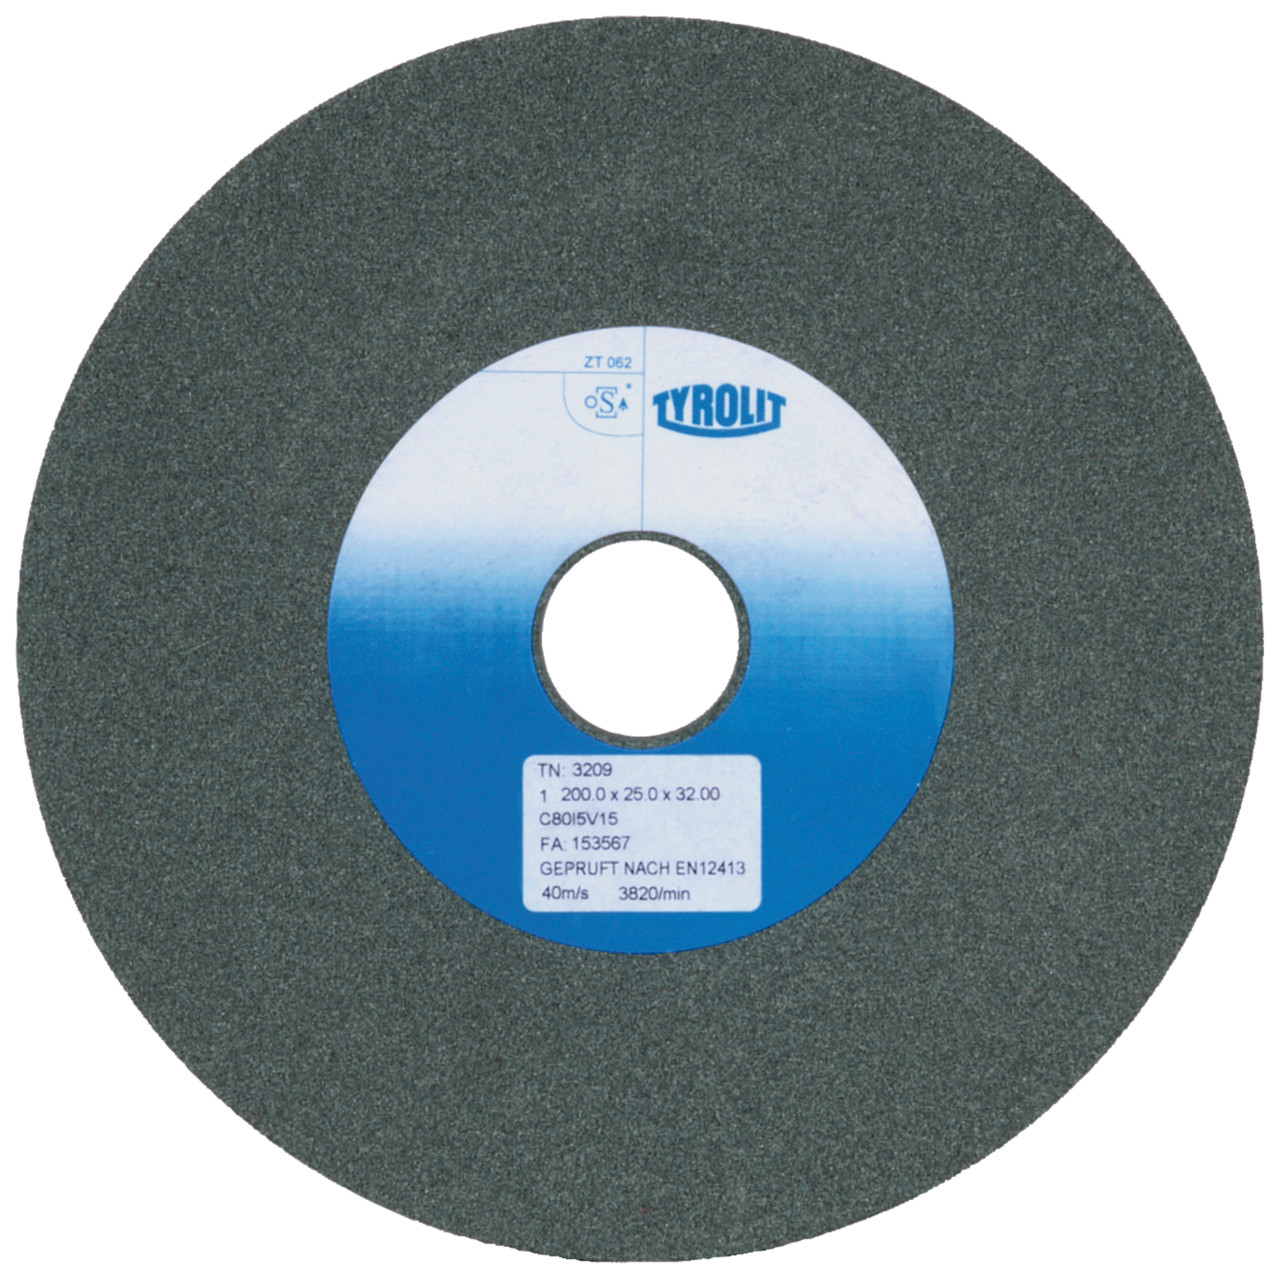 Tyrolit Conventional ceramic grinding discs DxDxH 150x20x32 For carbide and cast iron, shape: 1, Art. 450328